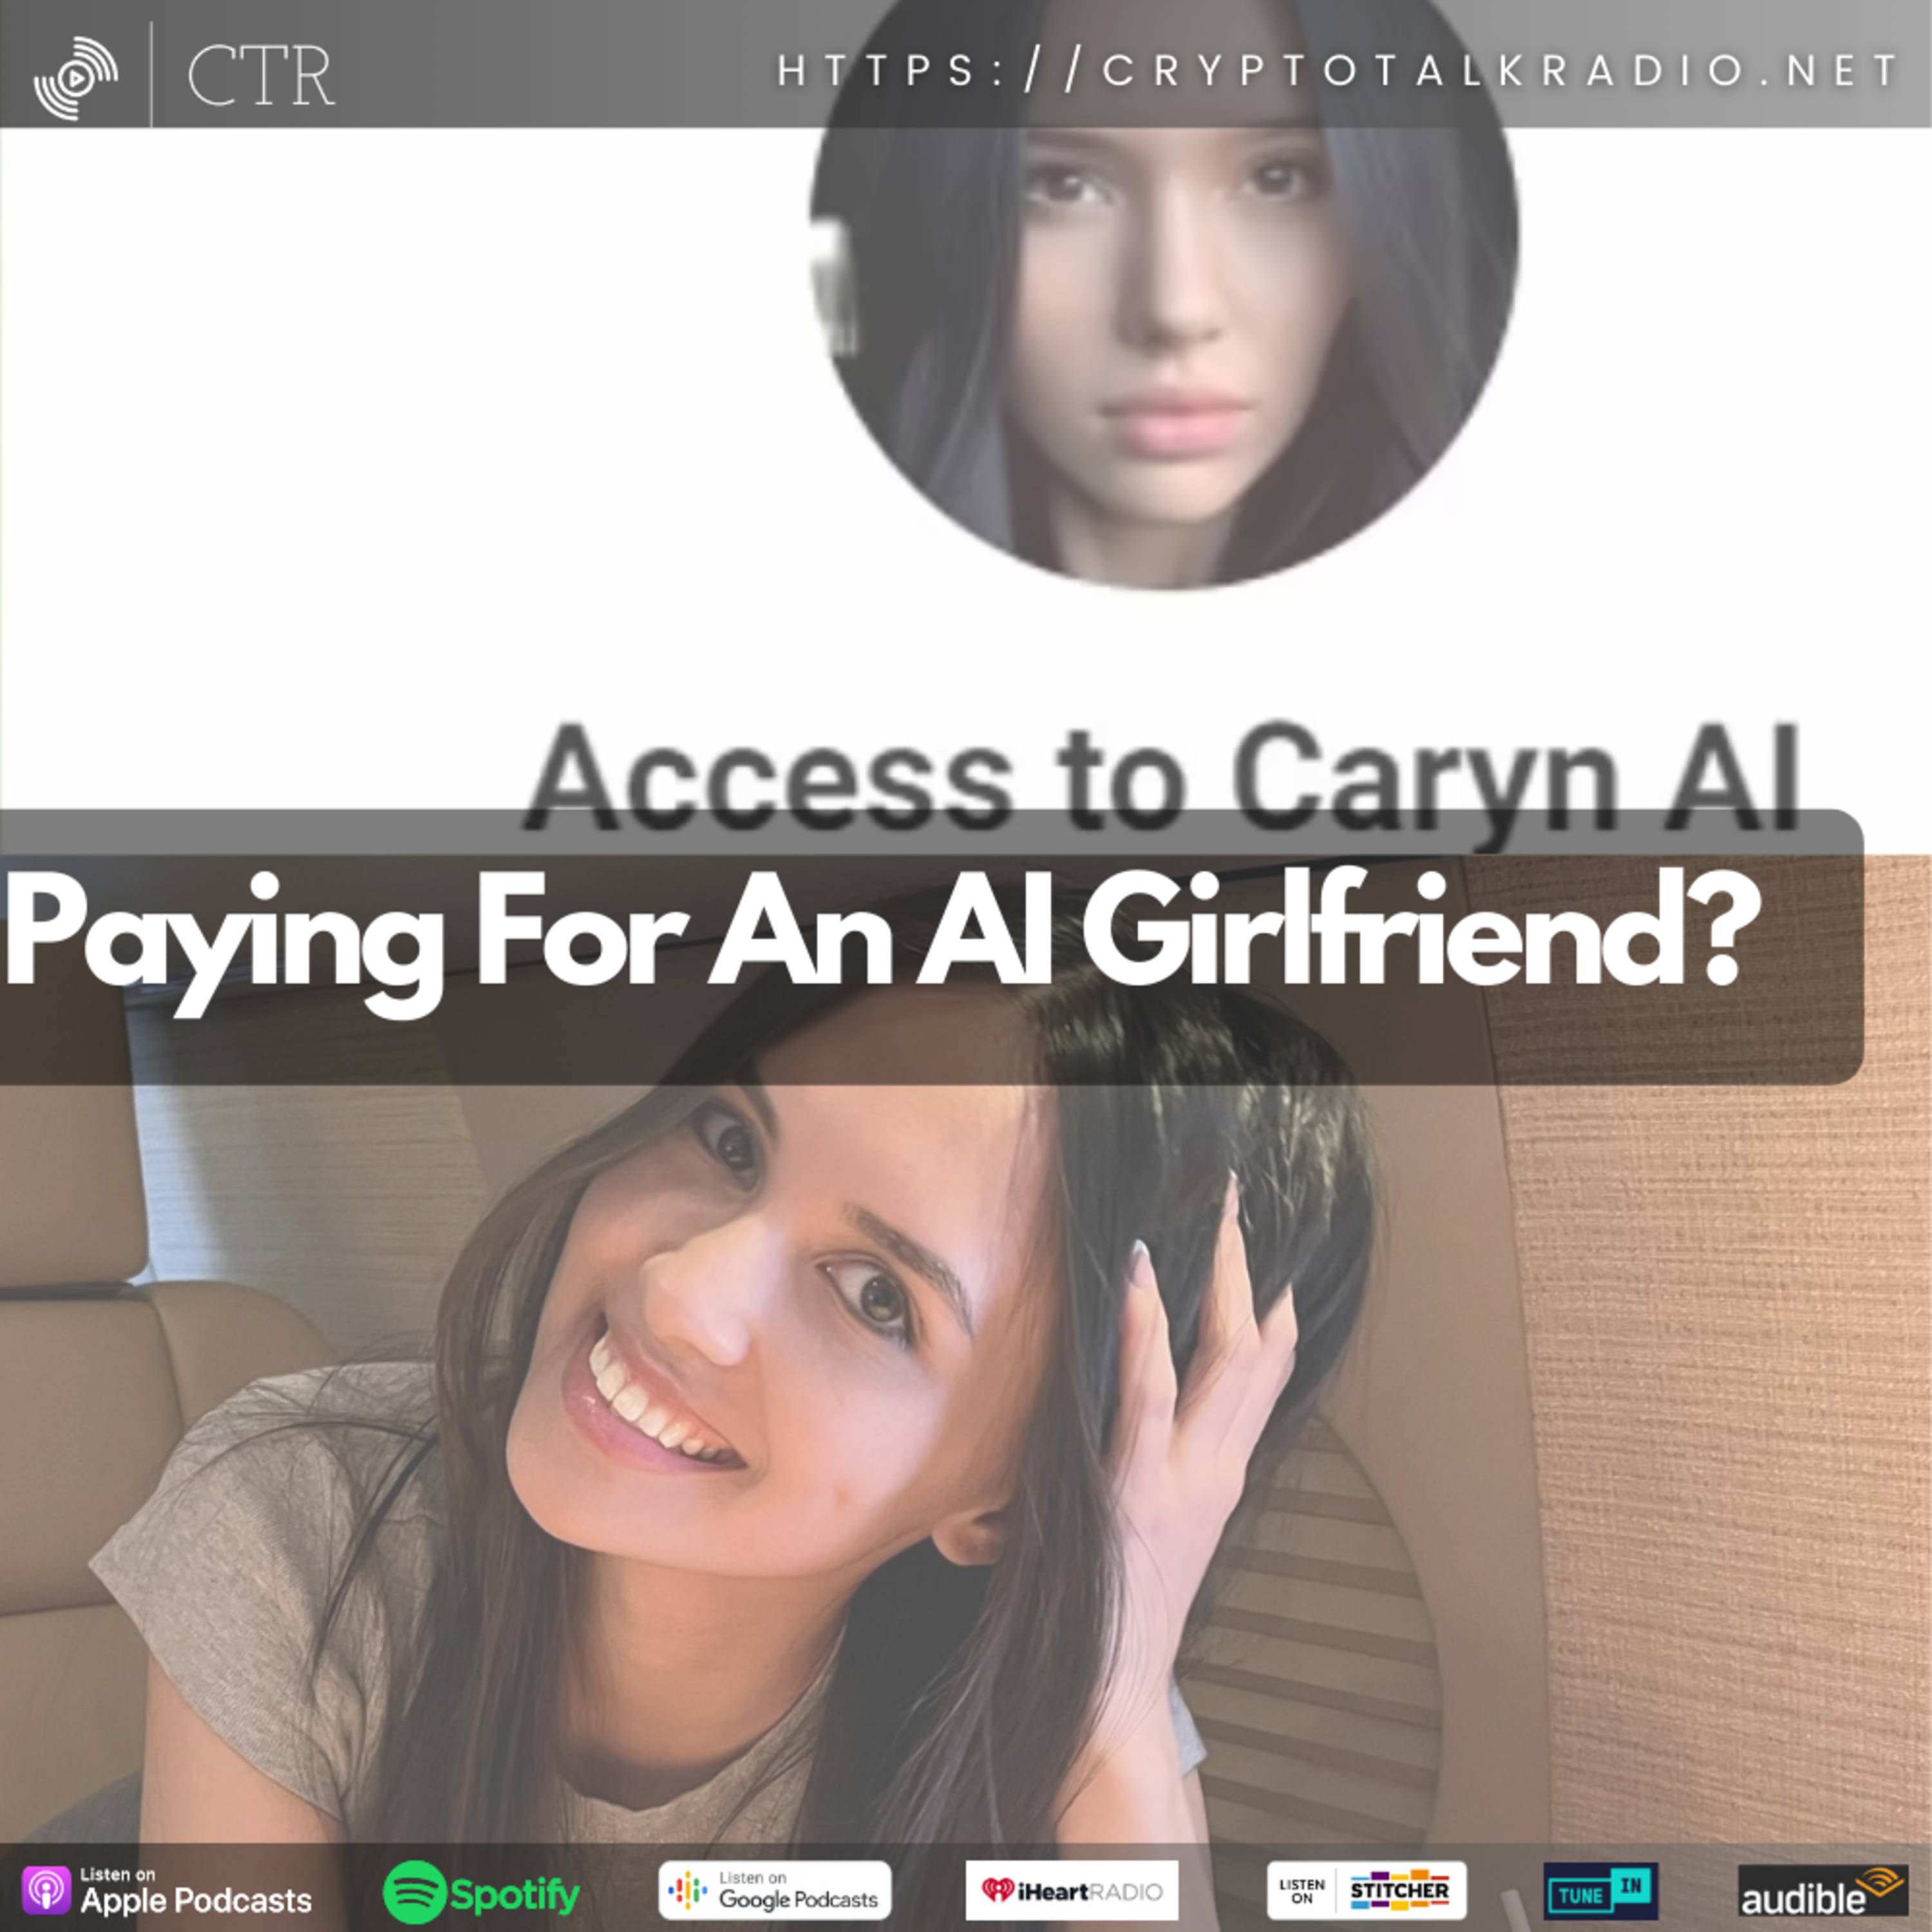 Paying For An AI Girlfriend? Really?